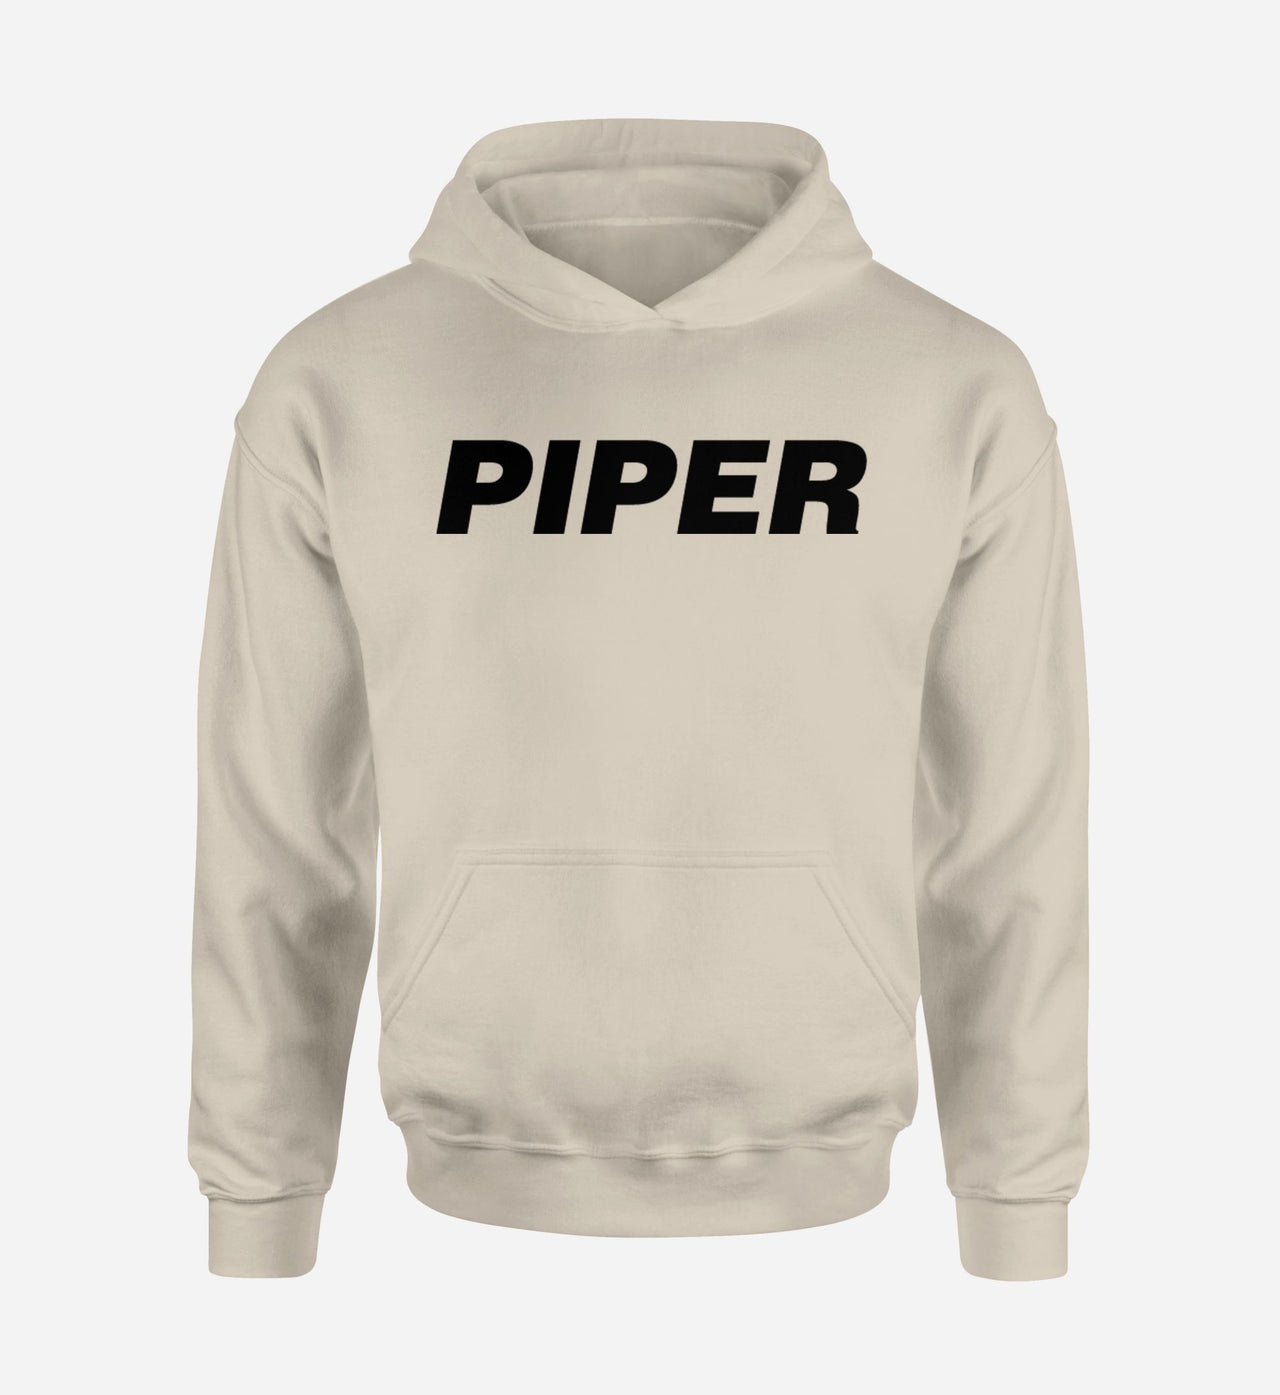 Piper & Text Designed Hoodies